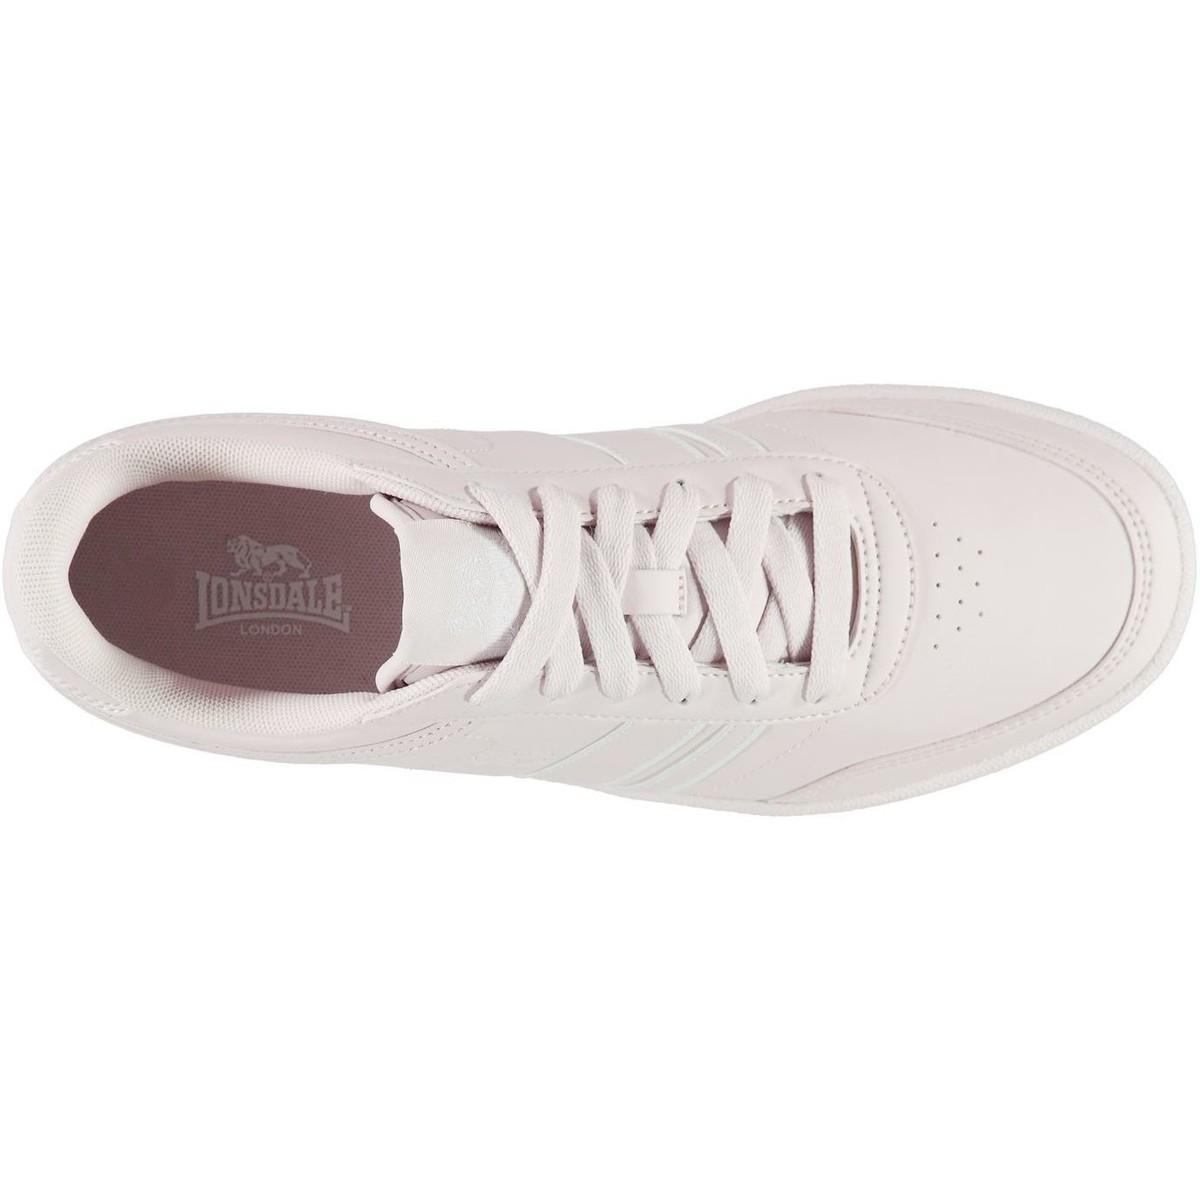 lonsdale womens trainers on sale cbefe 